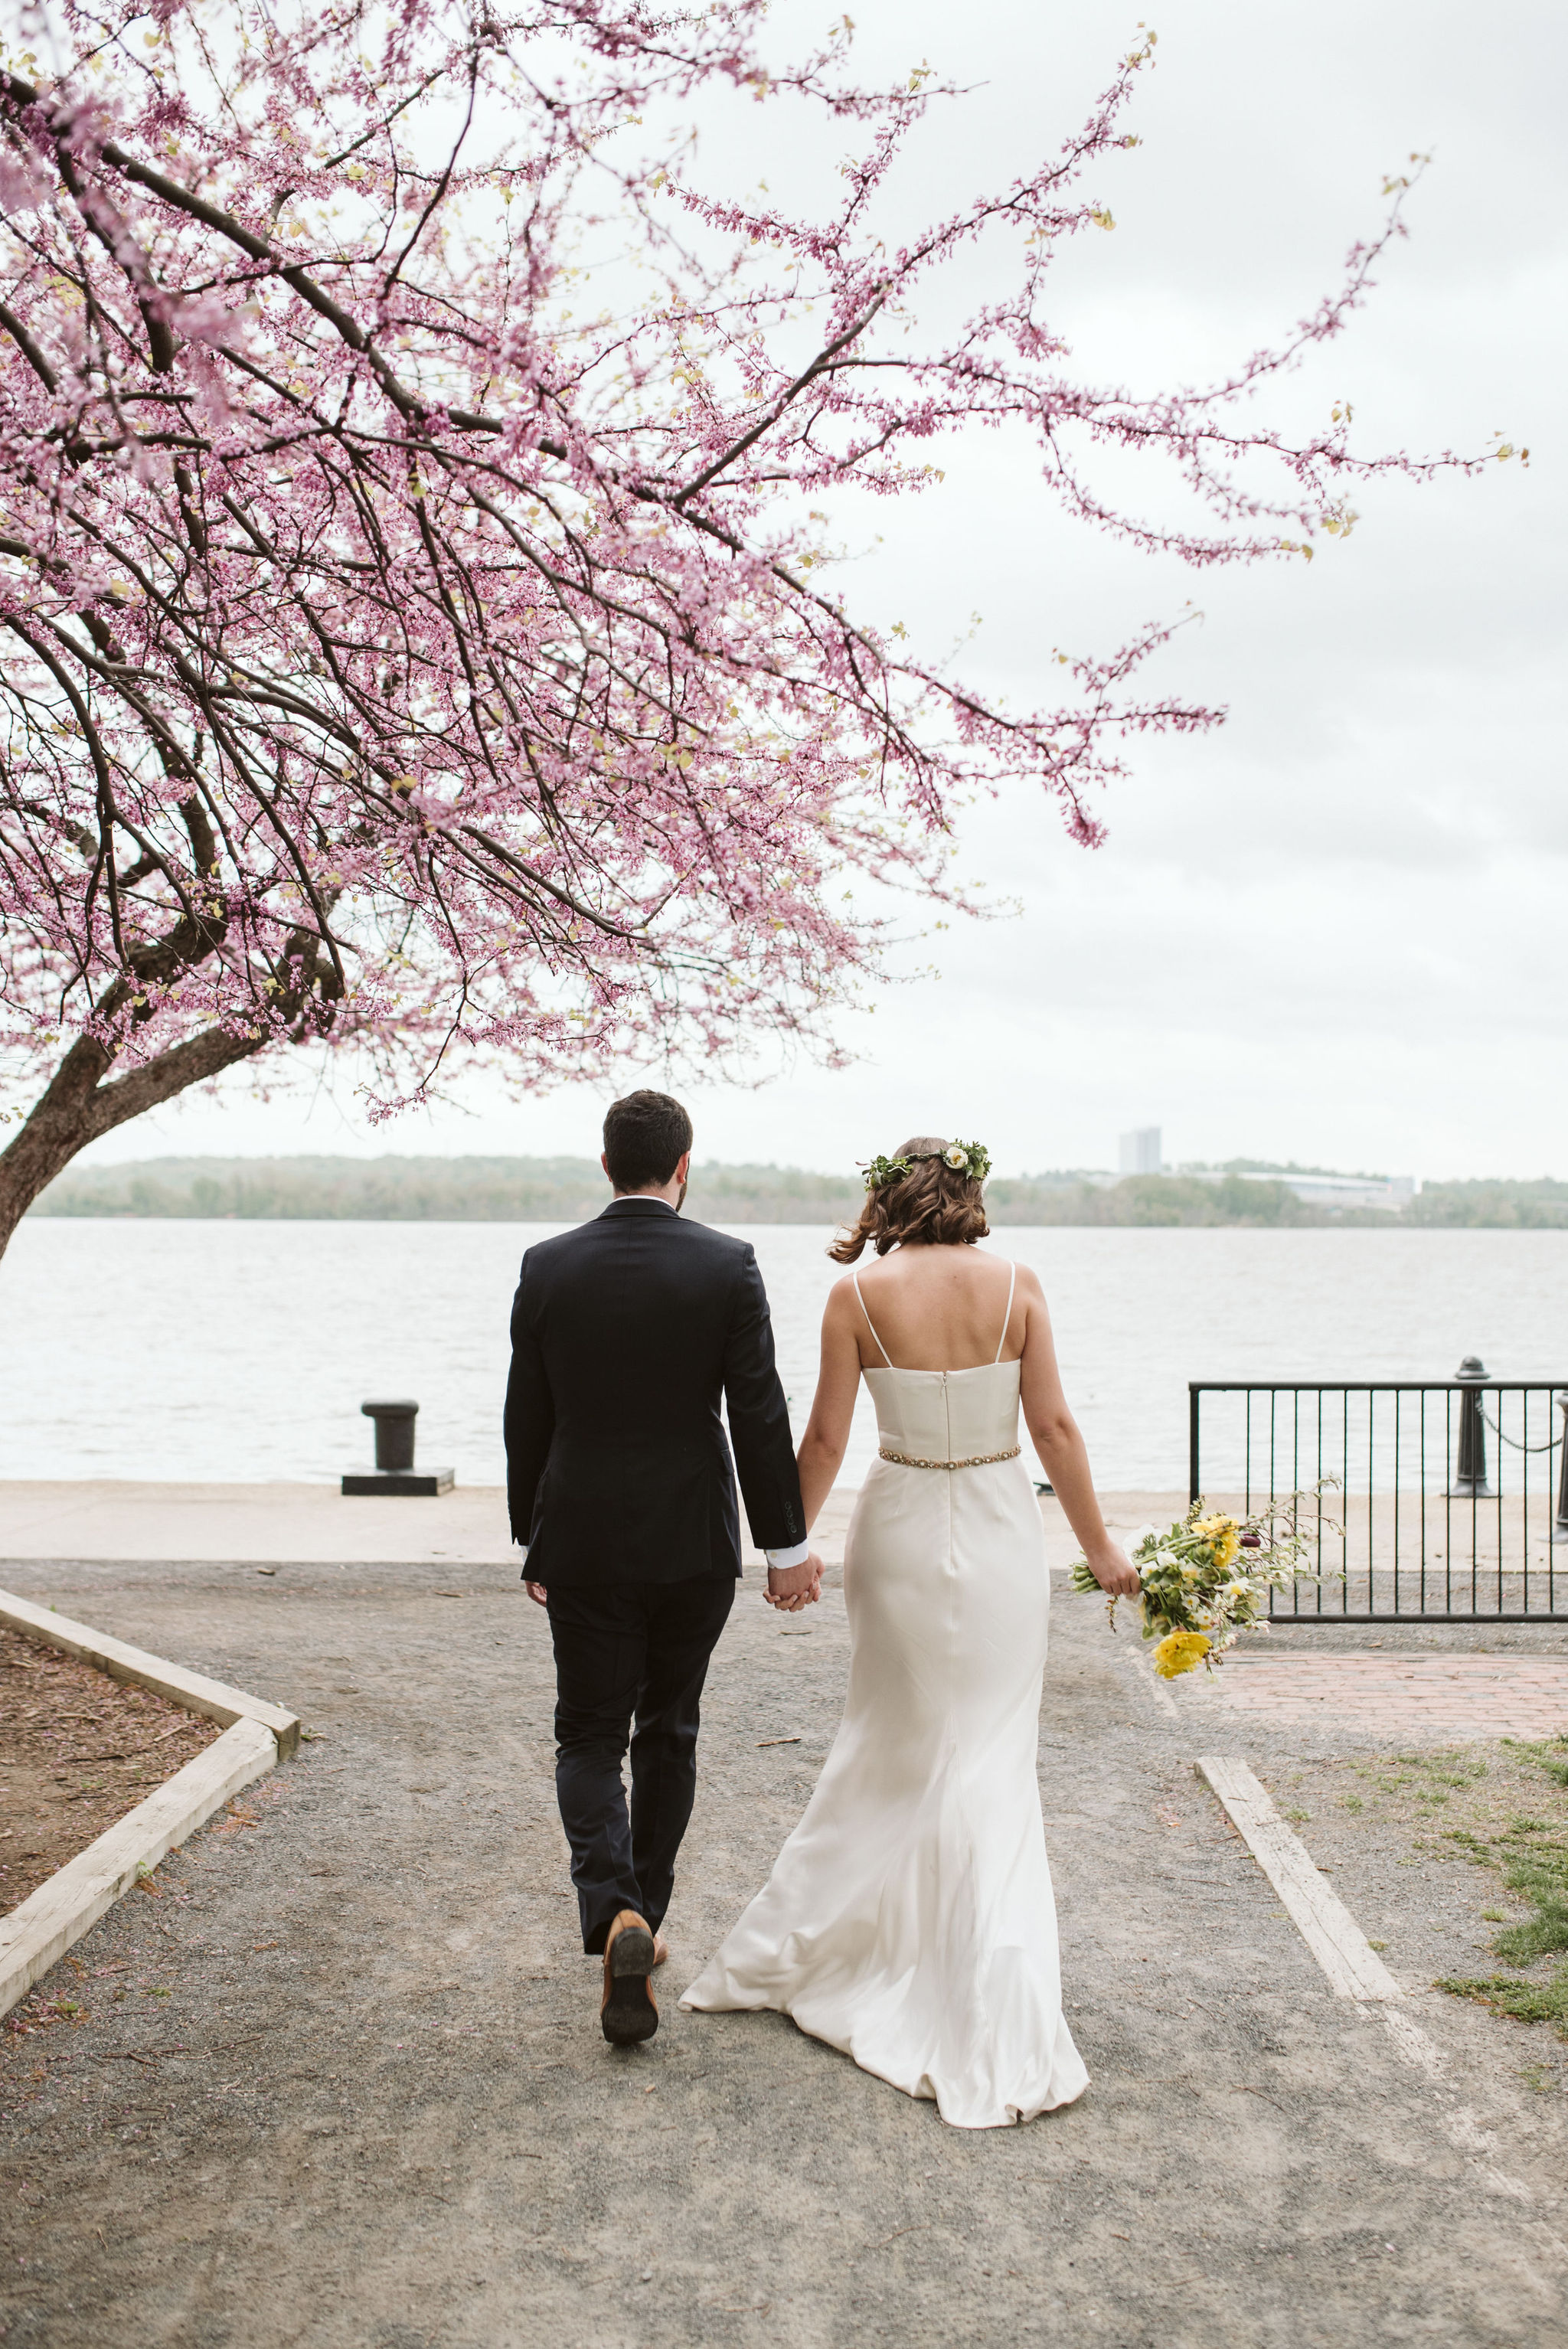  Washington DC, Baltimore Wedding Photographer, Alexandria, Old Town, Jewel Tone, Romantic, Modern, Bride and Groom Walking Hand in Hand from Behind, Waterfront 